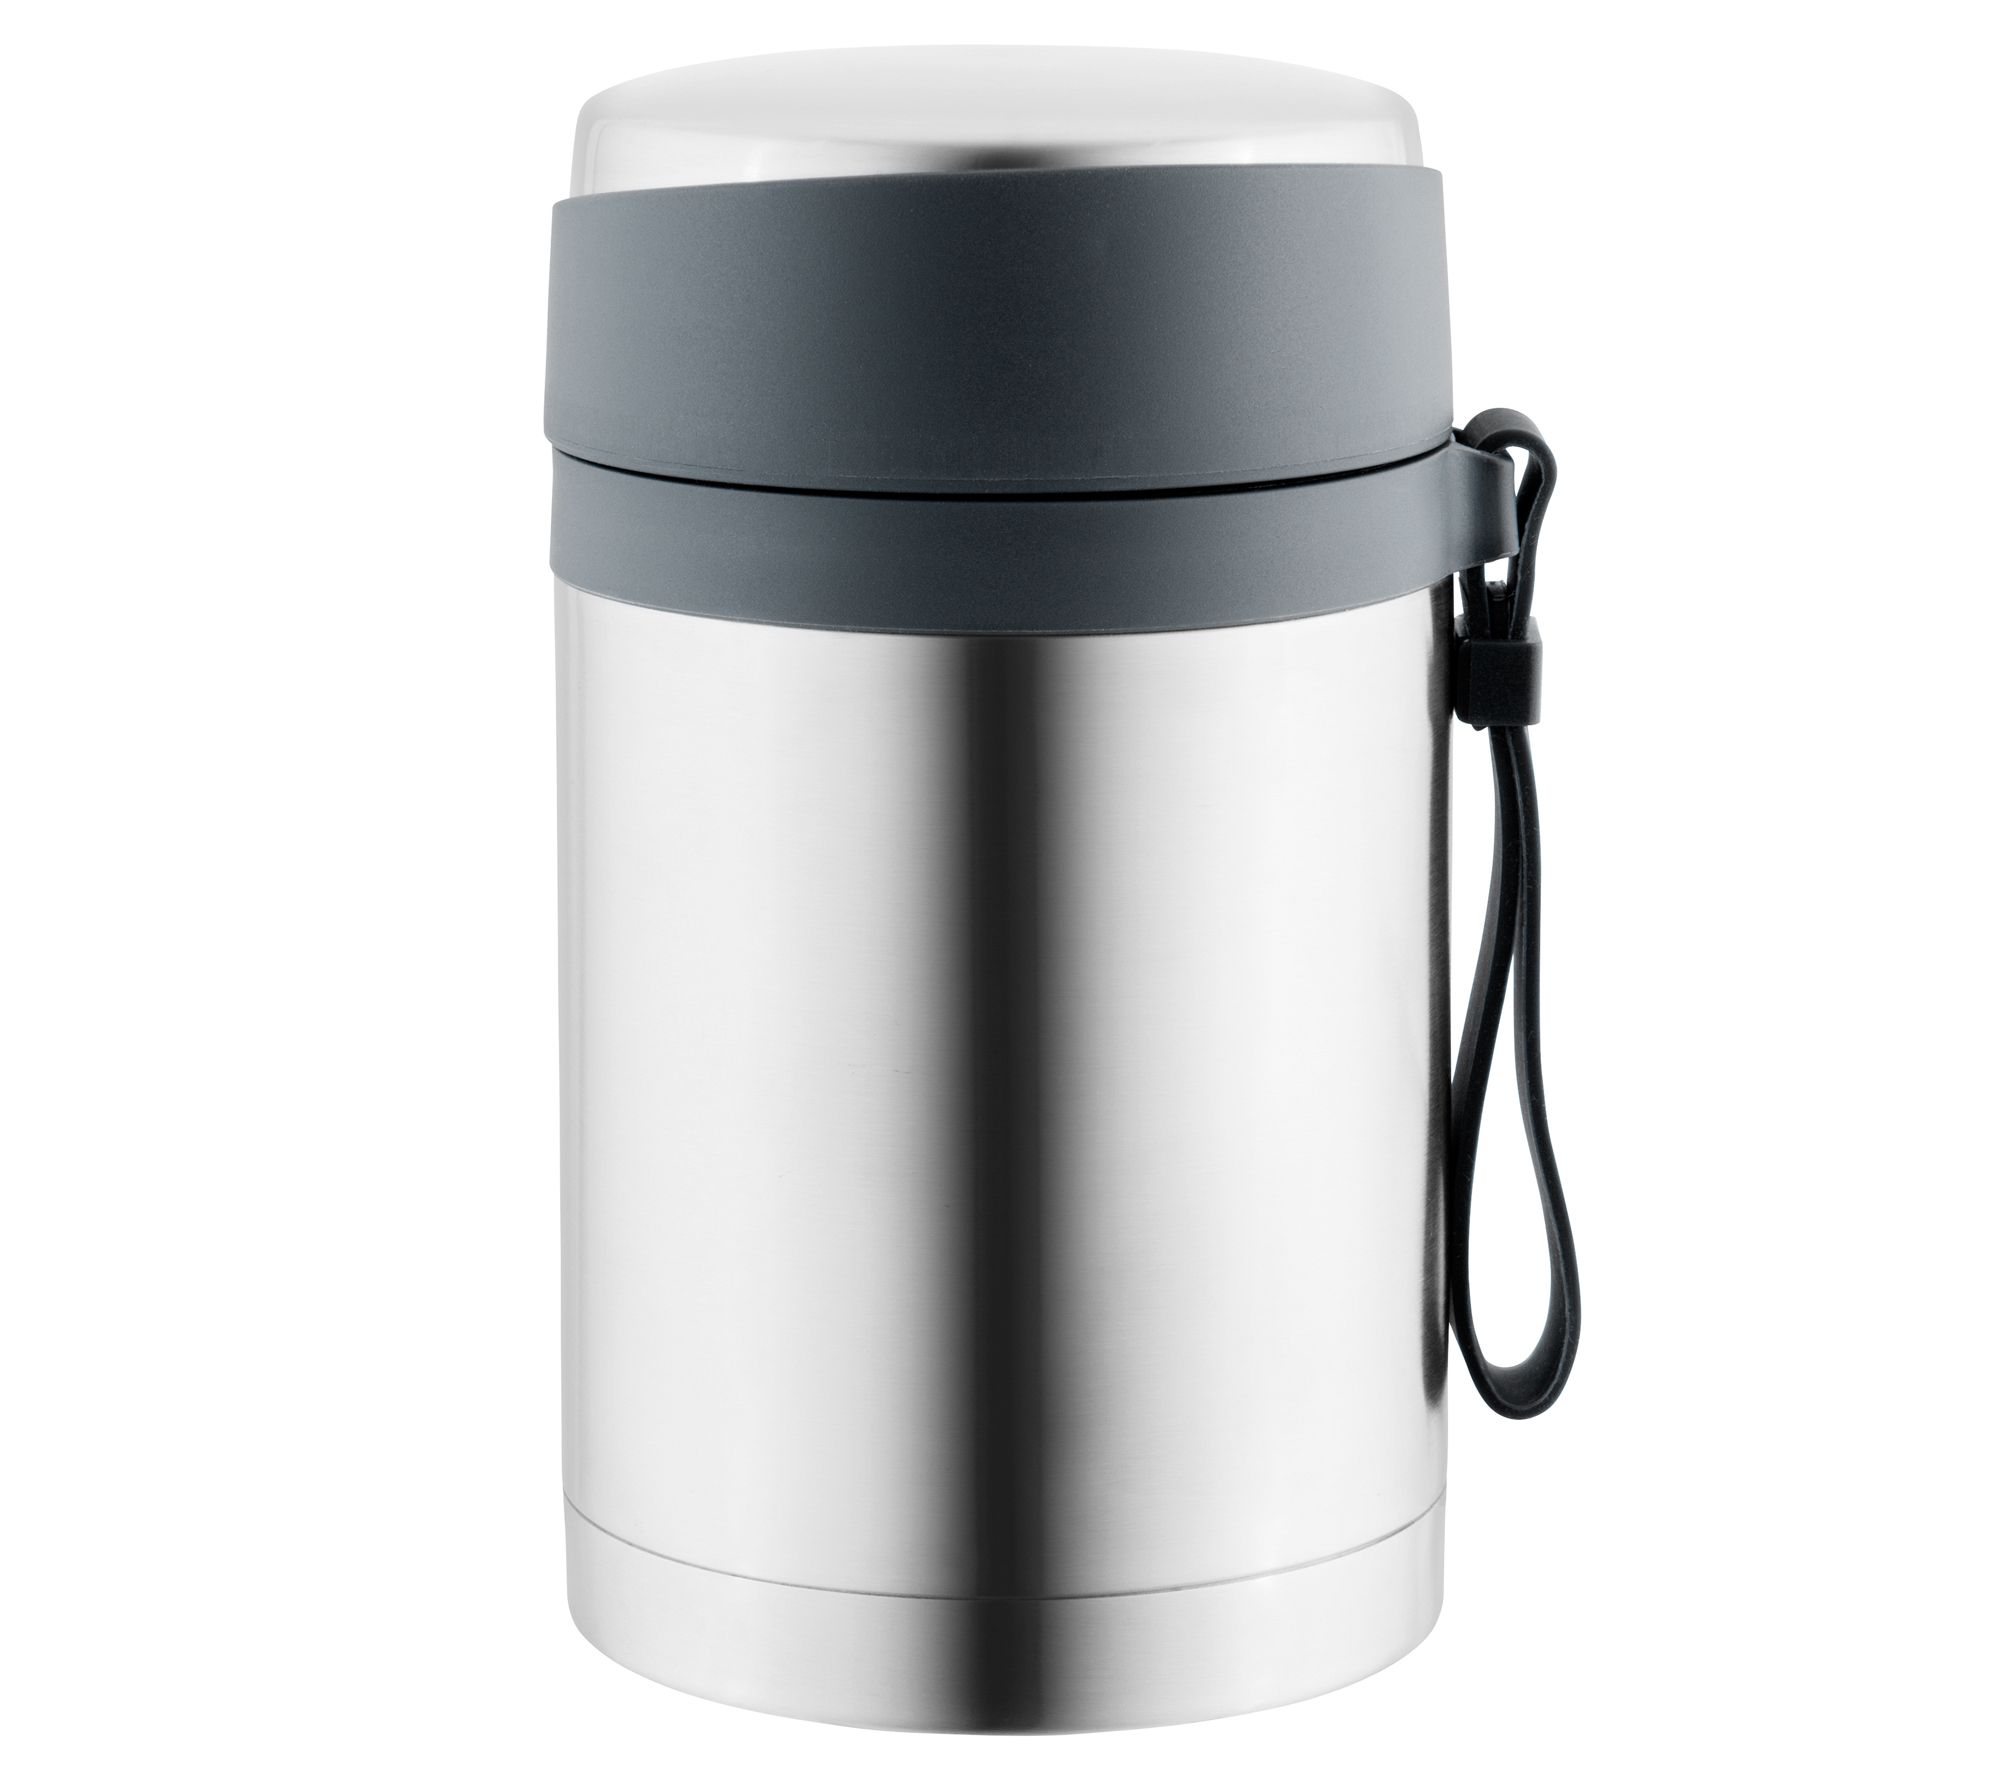 Thermos Stainless King Vacuum-Insulated Food Jar, 24 oz., Silver at Tractor  Supply Co.